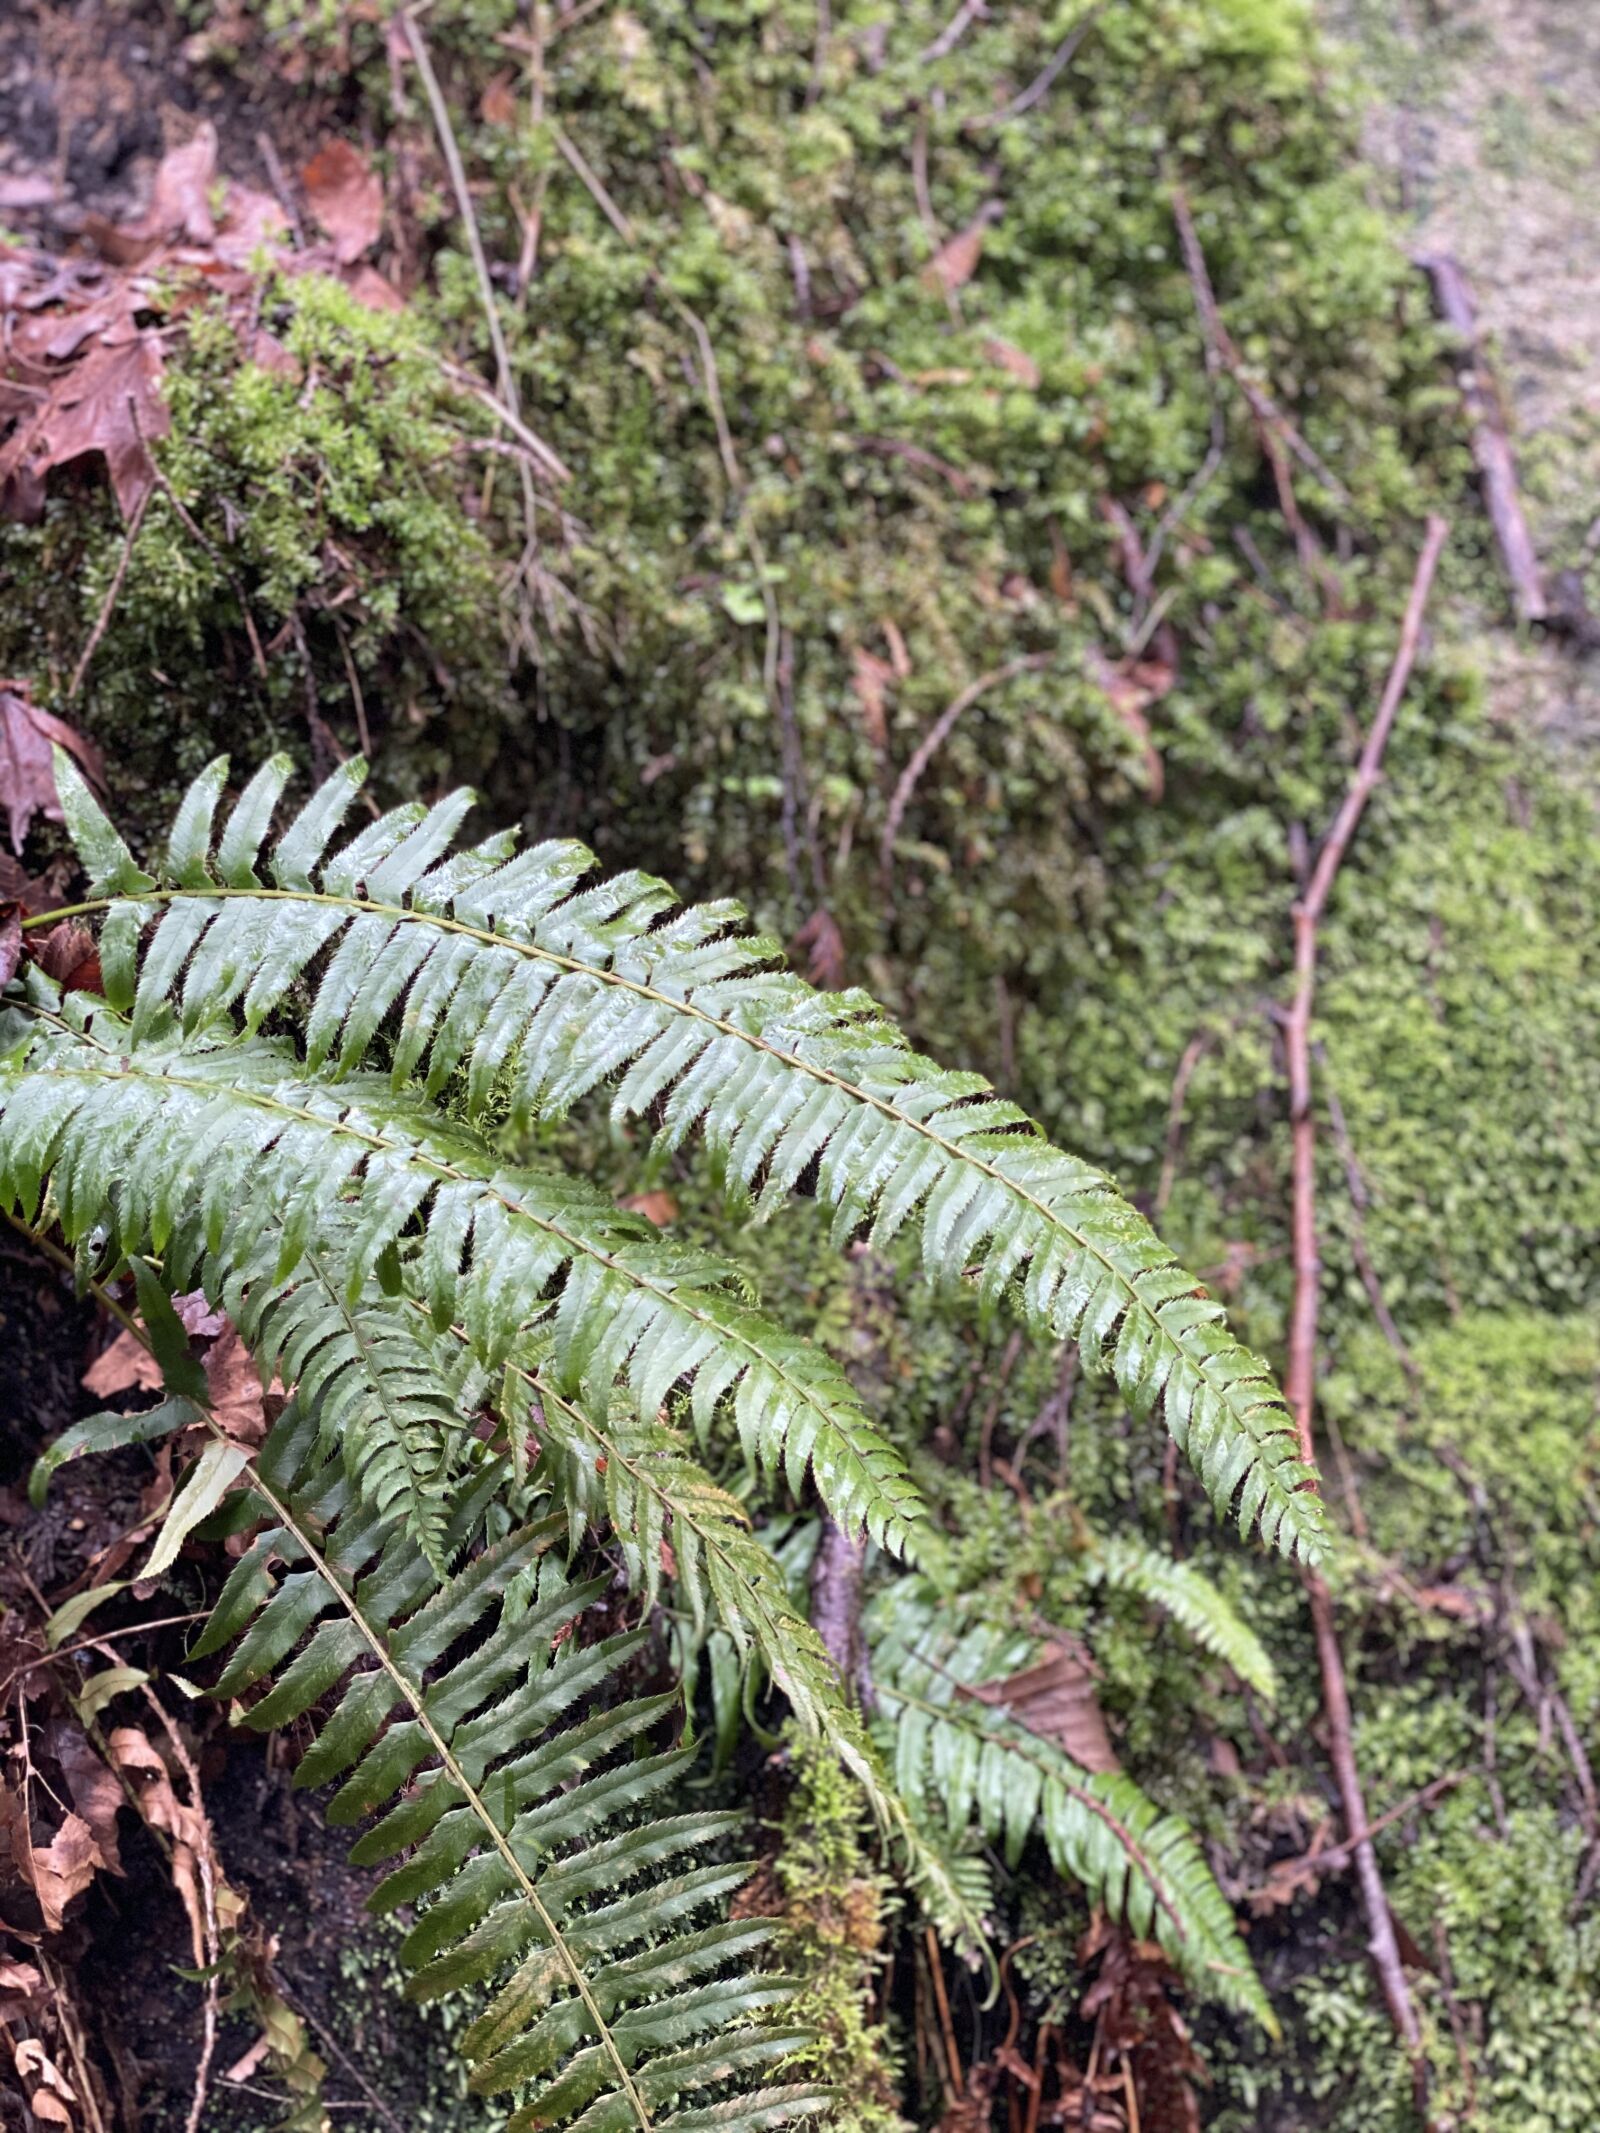 Apple iPhone 11 Pro Max + iPhone 11 Pro Max back dual camera 6mm f/2 sample photo. Fern, moss, nature photography